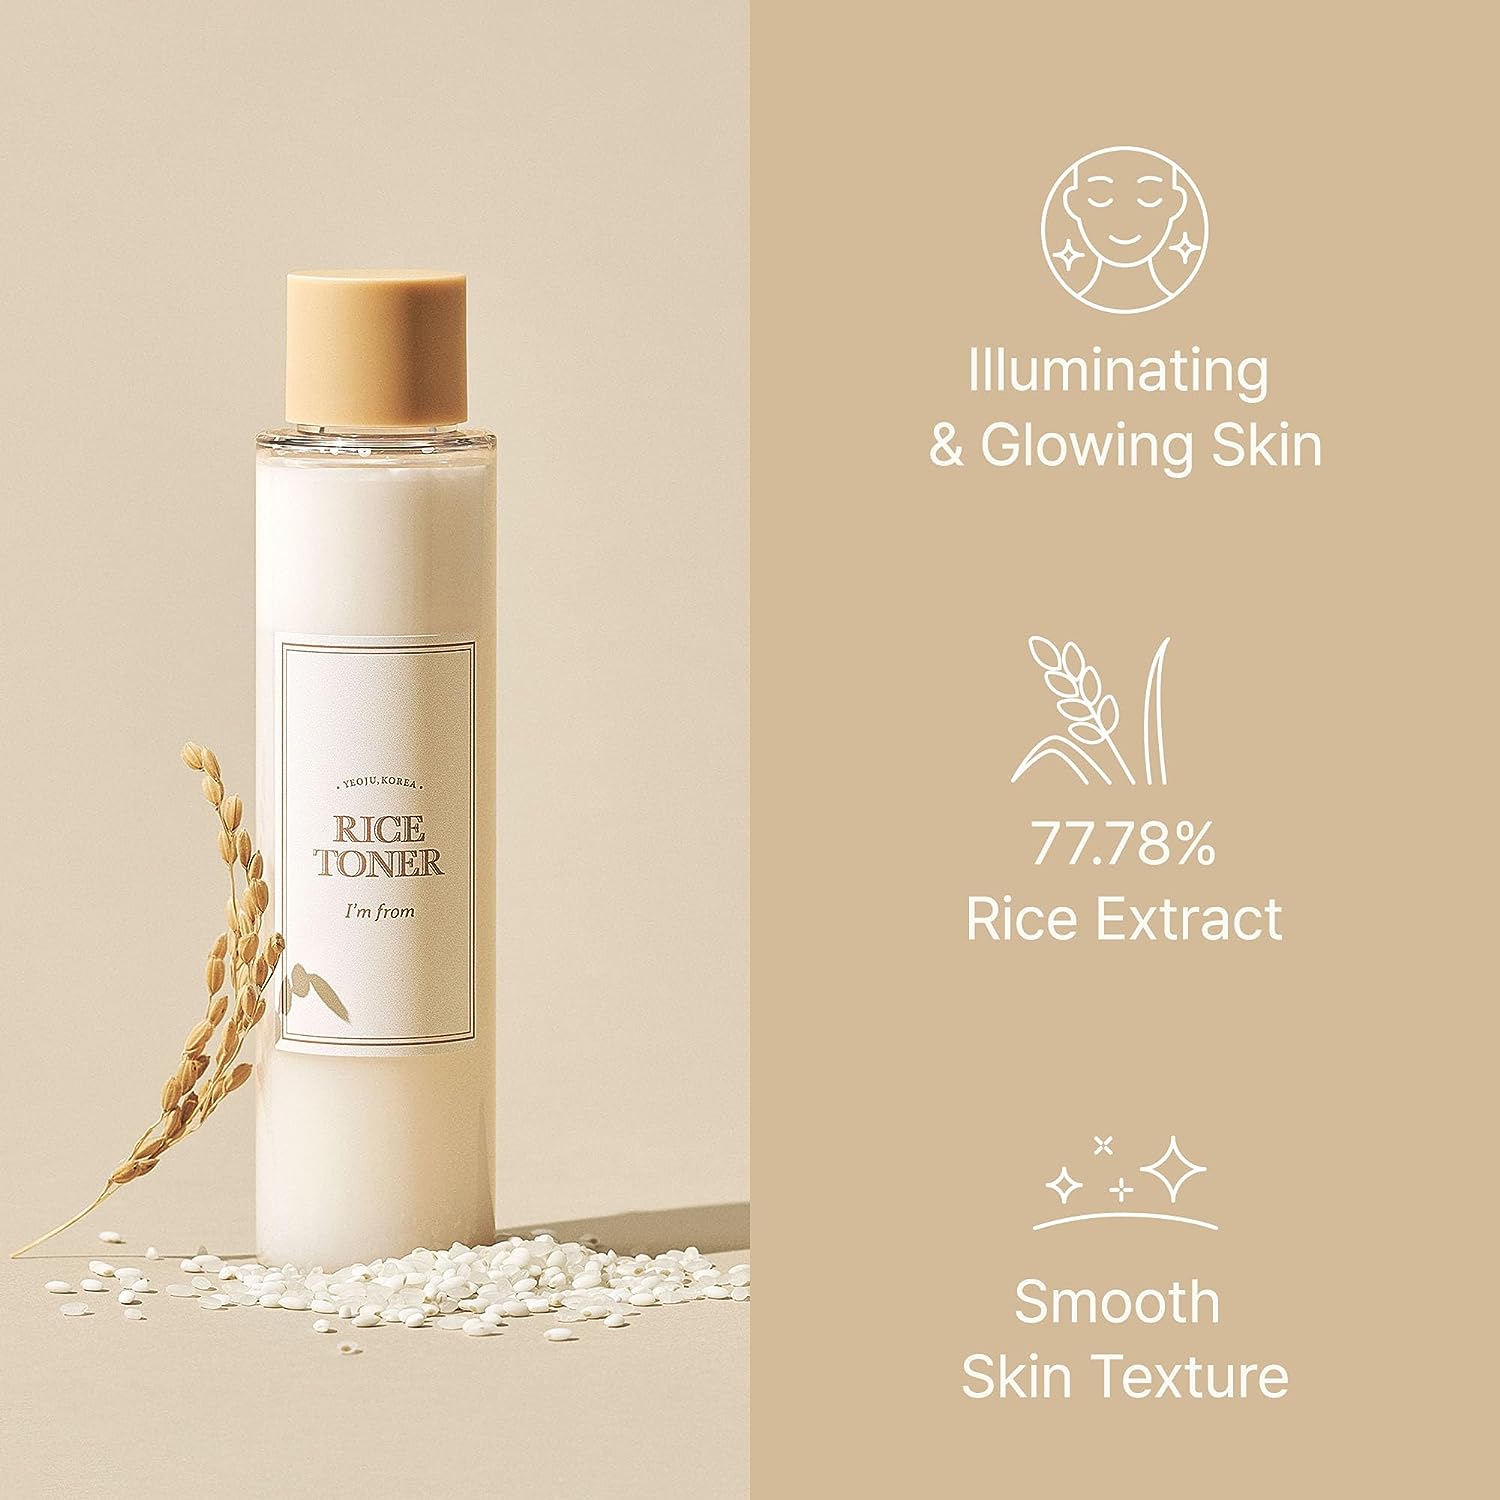 I'm from Rice Toner, 77.78% Rice Extract from Korea, Glow Essence with  Niacinamide, Hydrating for Dry Skin, Vegan, Alcohol Free, Fragrance Free,  Peta Approved, K Beauty Toner, 5.07 Fl Oz – Shining